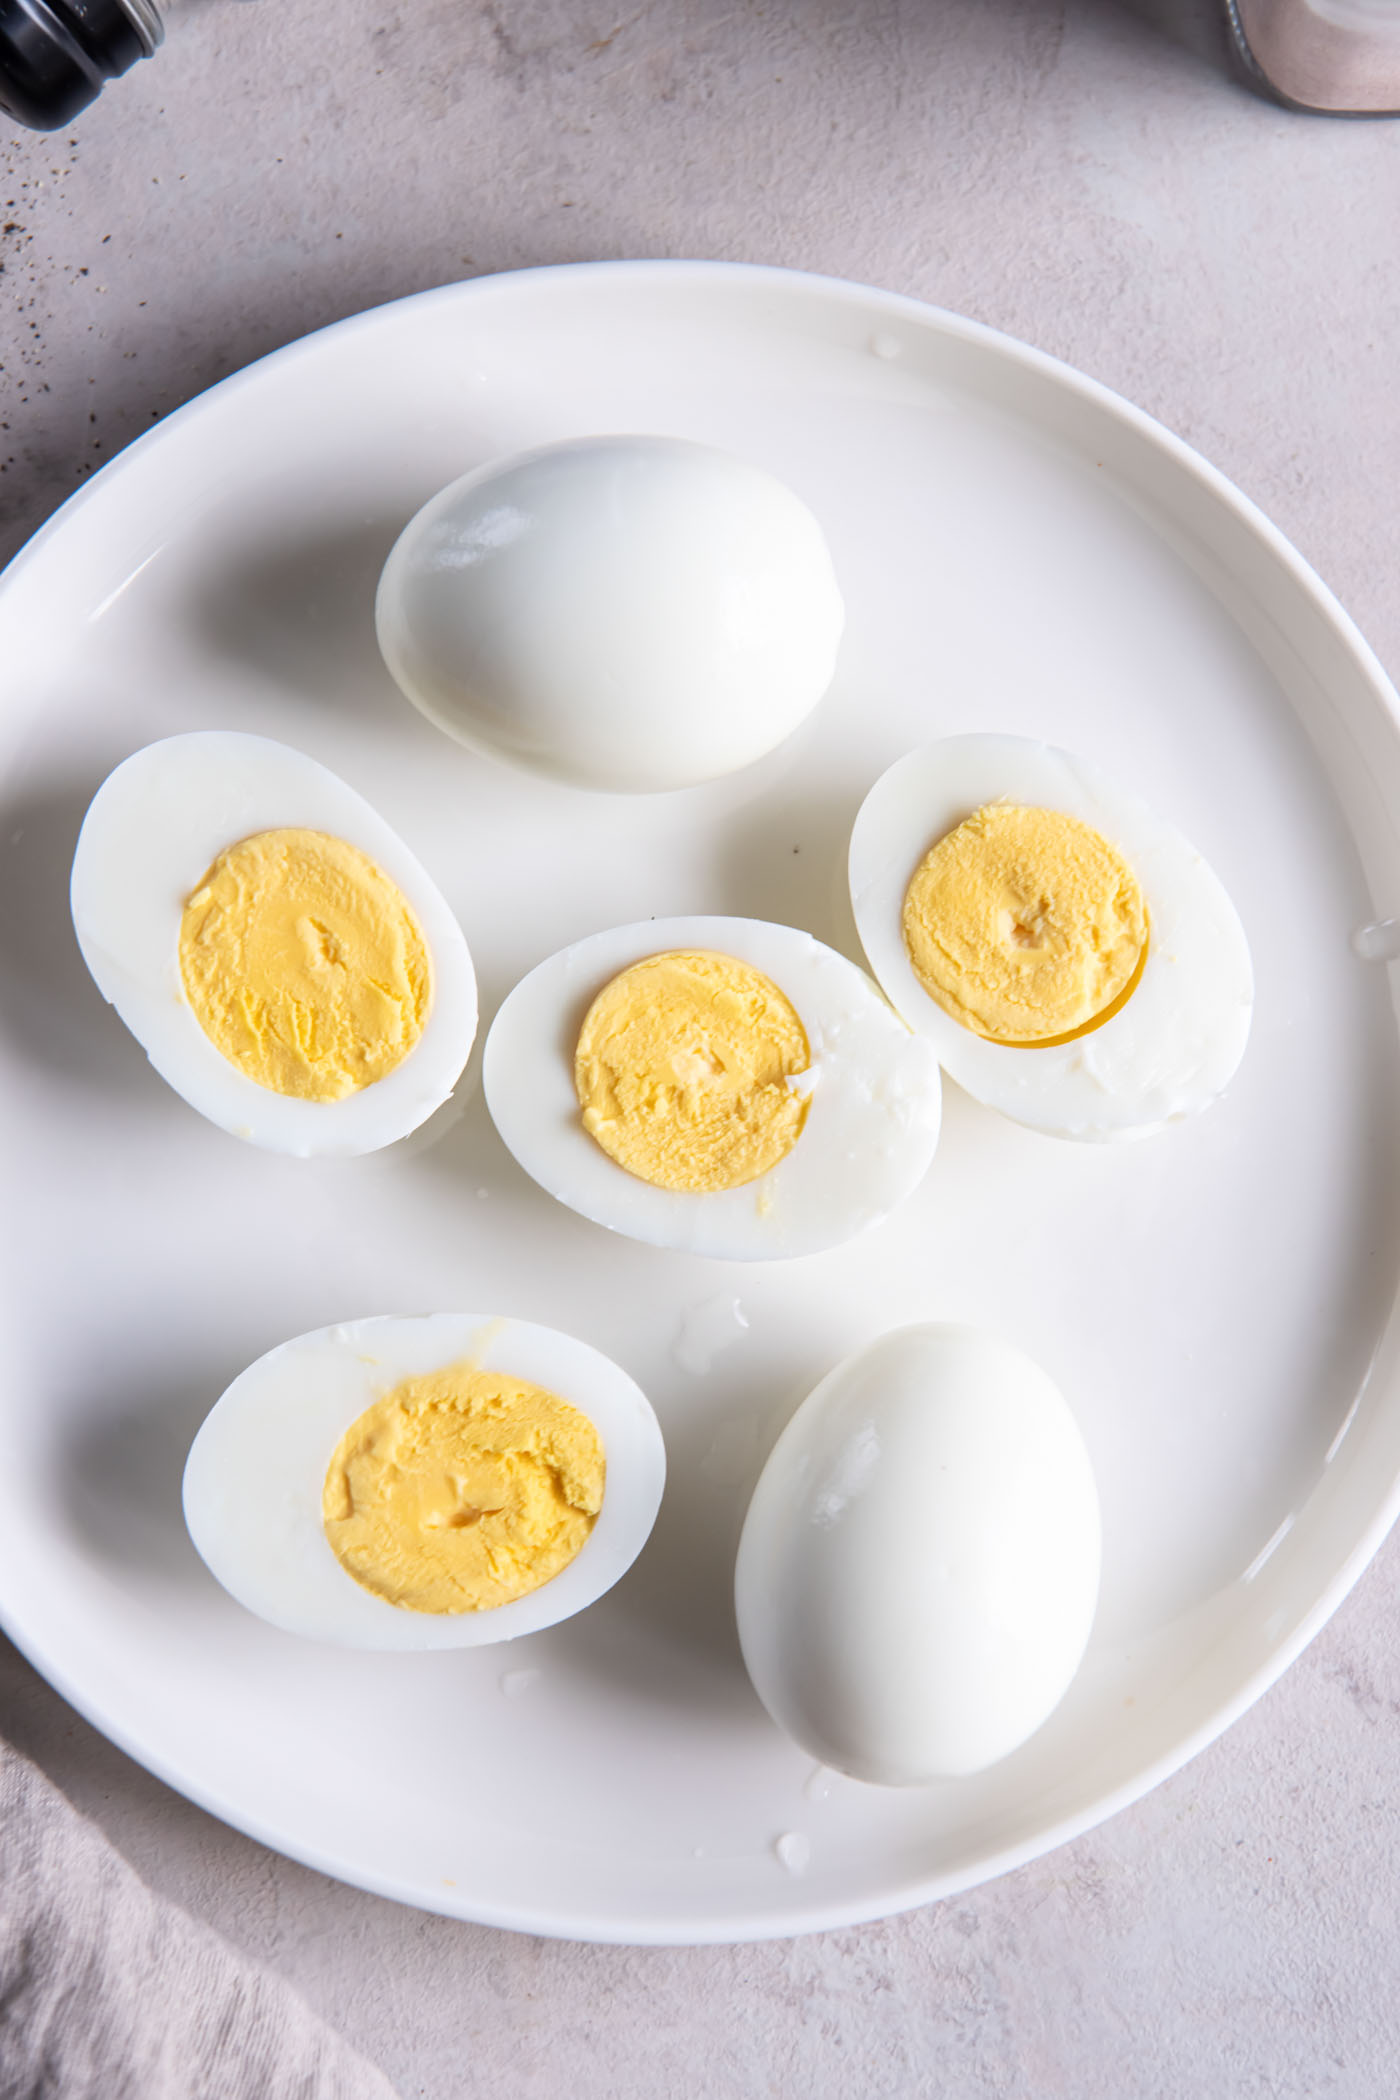 Four halved hard boiled eggs and two whole peeled eggs on a plate.